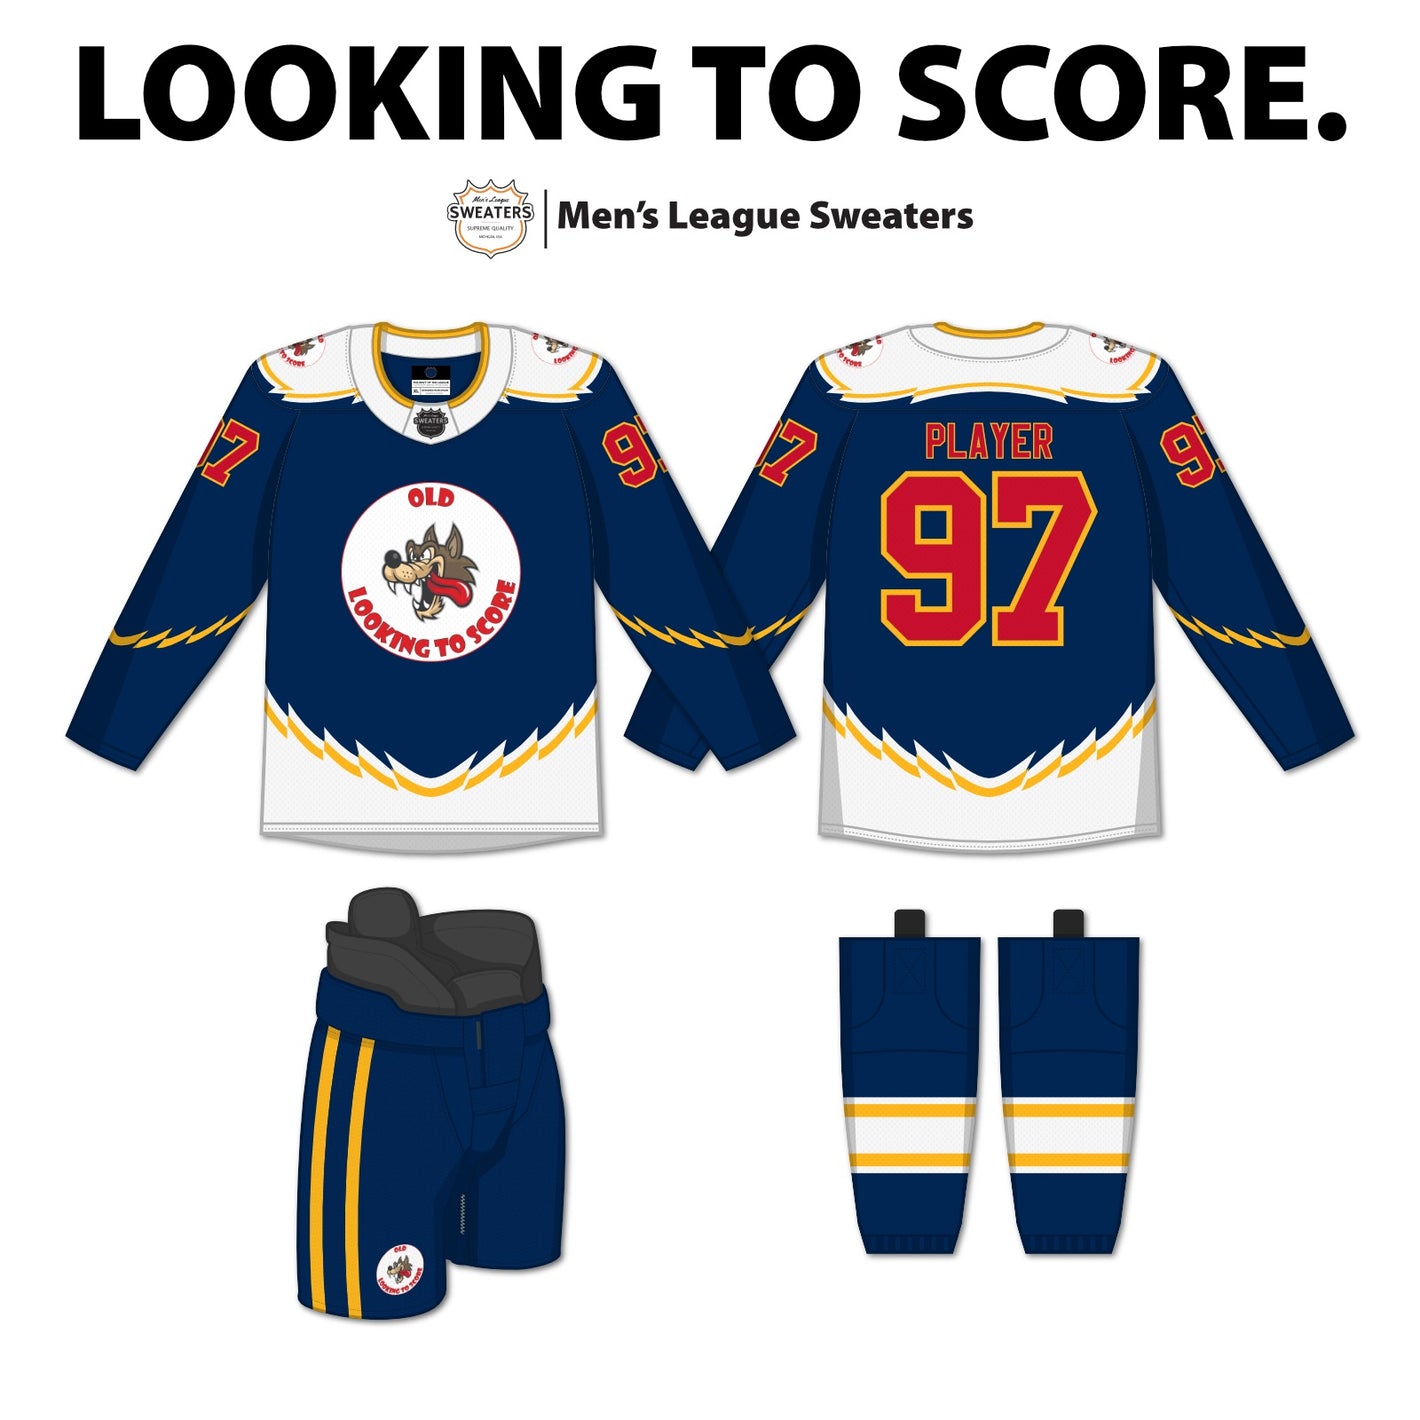 new mens league sweaters - My Collection - Gallery - Pro Stock Hockey 